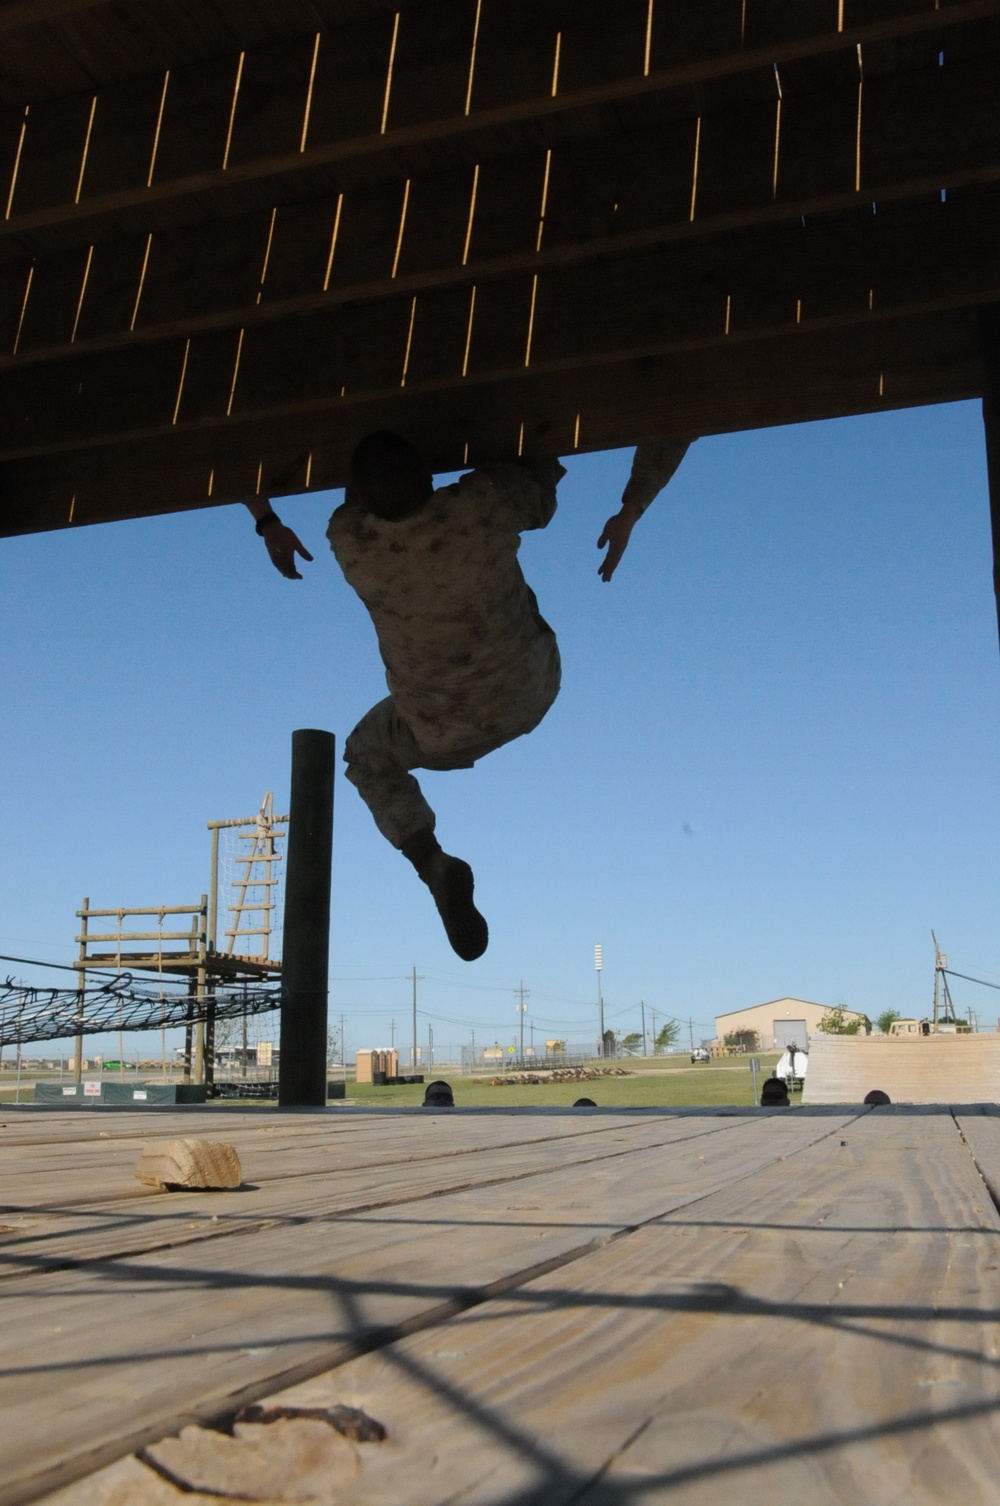 473rd Marine Wing Support Squadron makes history at Fort Hood